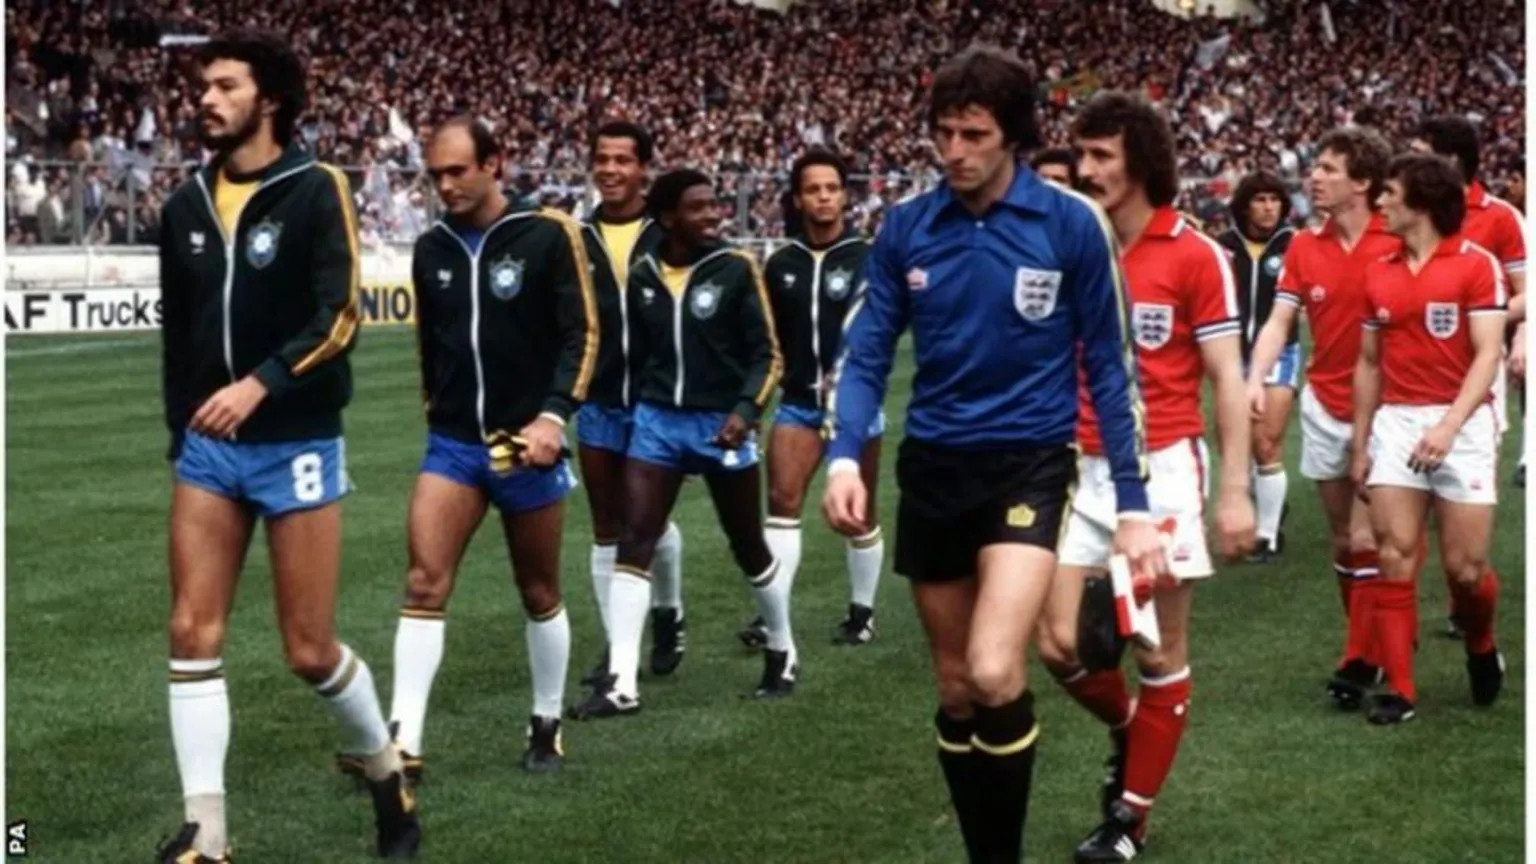 PA Media England and Brazil teams walk on to the pitch at Wembley